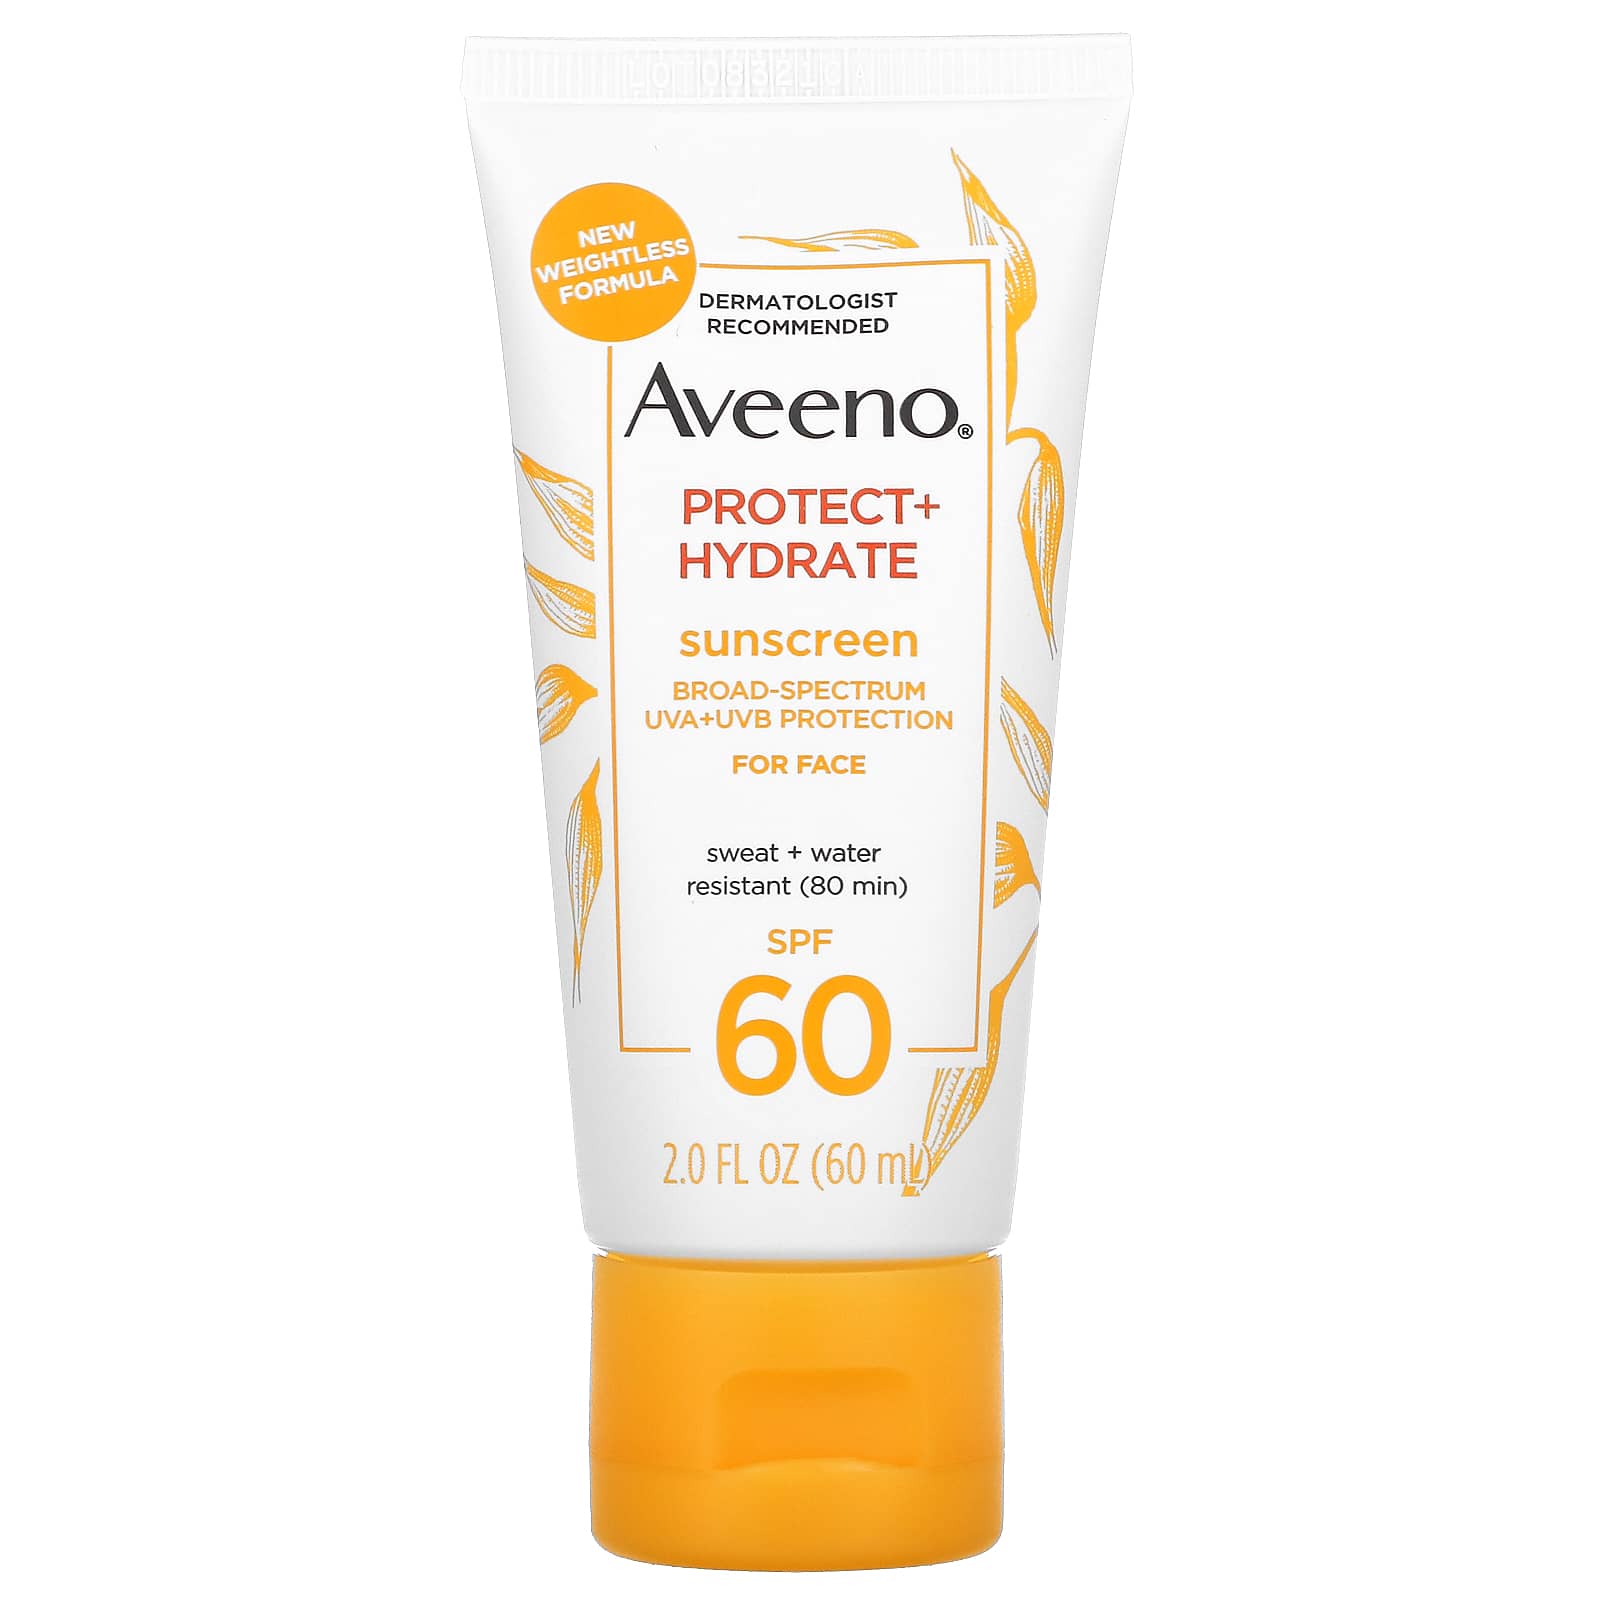 Aveeno, Protect + Hydrate, Sunscreen, For Face